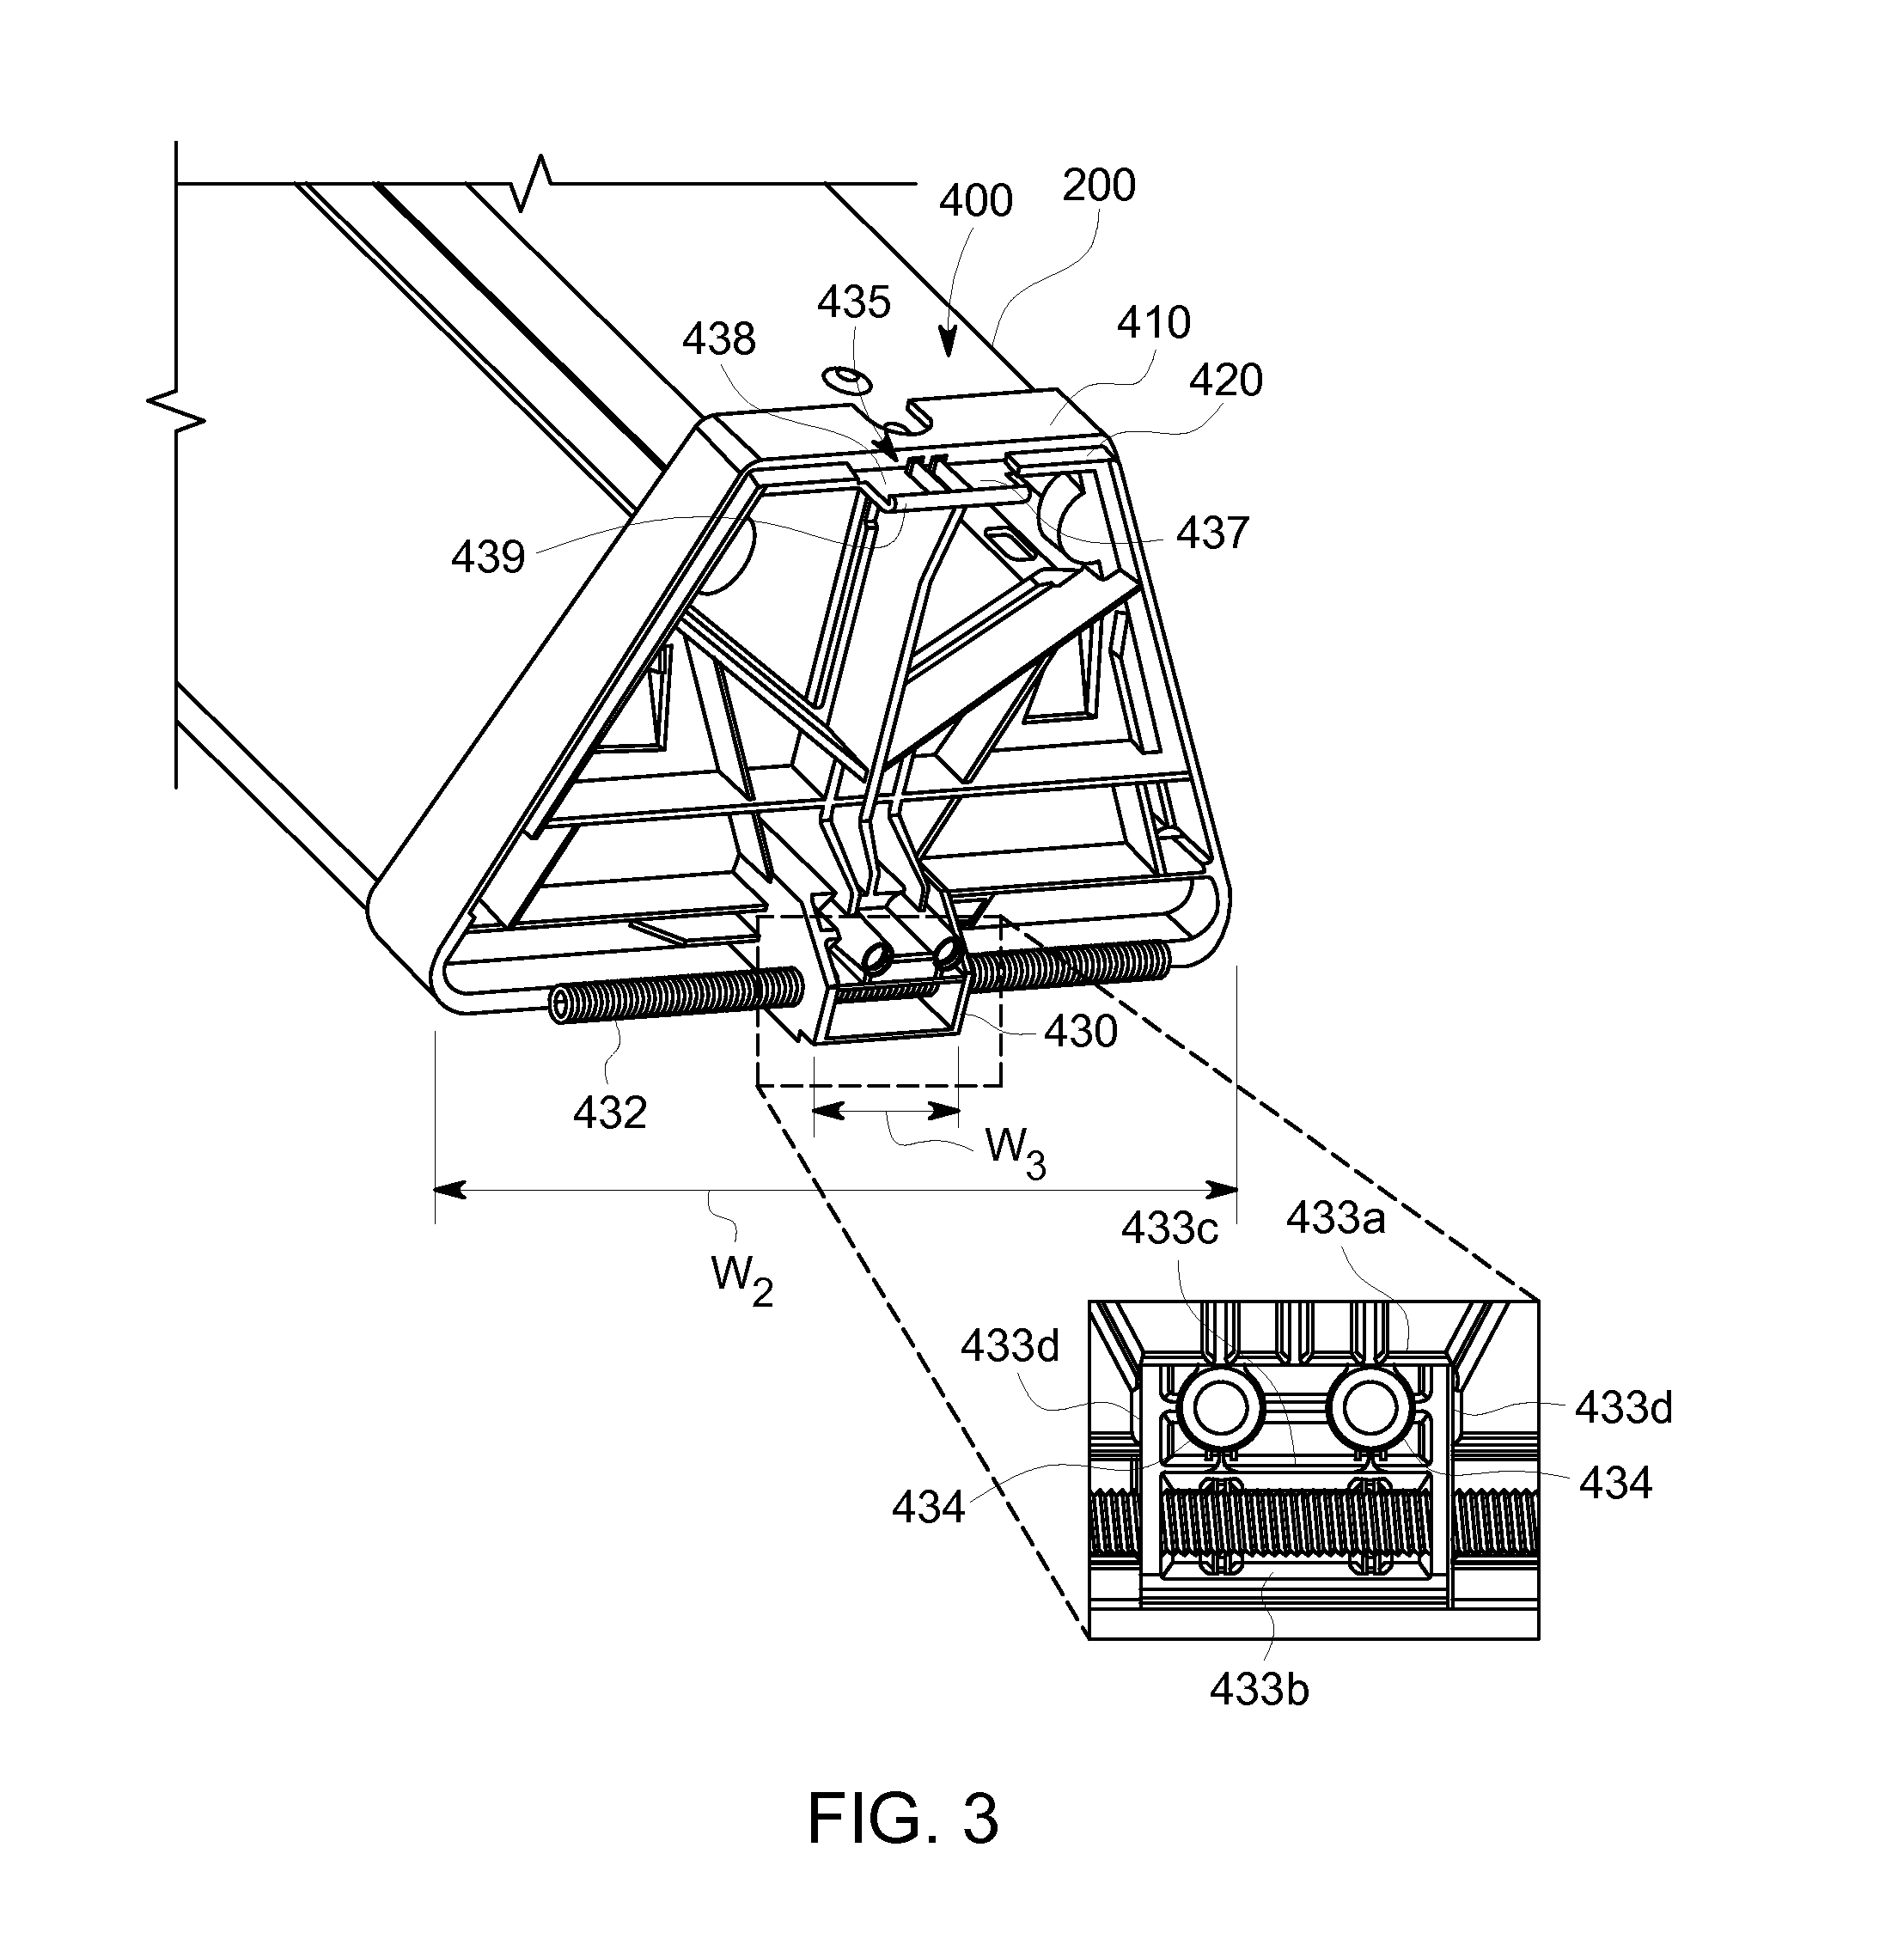 Connector assembly for mounting lighting fixture